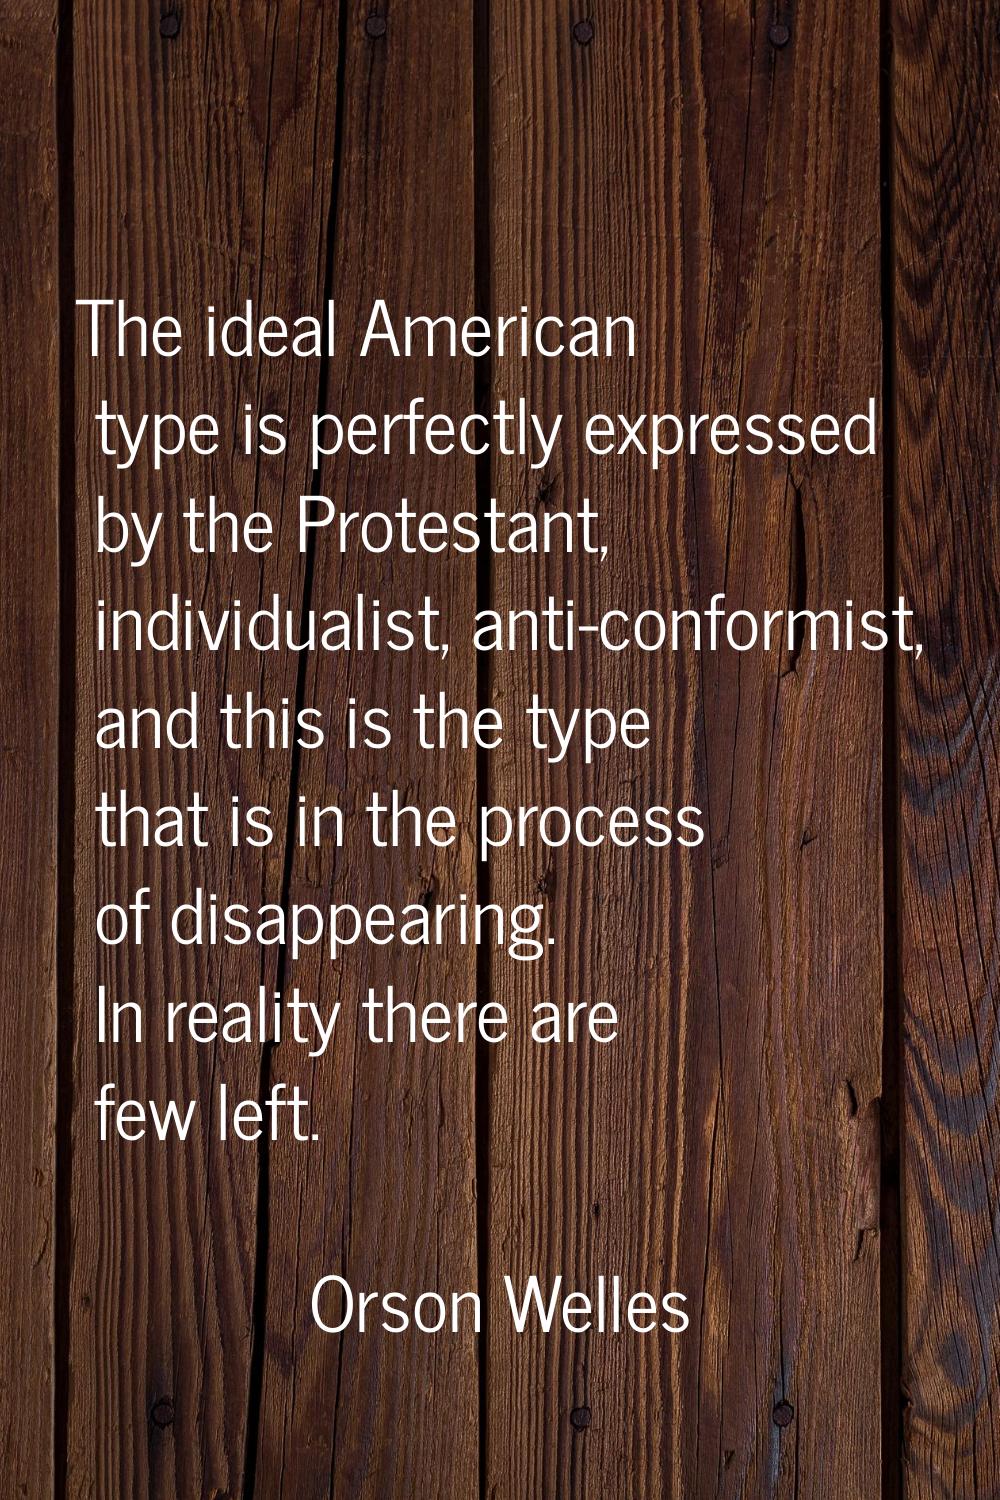 The ideal American type is perfectly expressed by the Protestant, individualist, anti-conformist, a